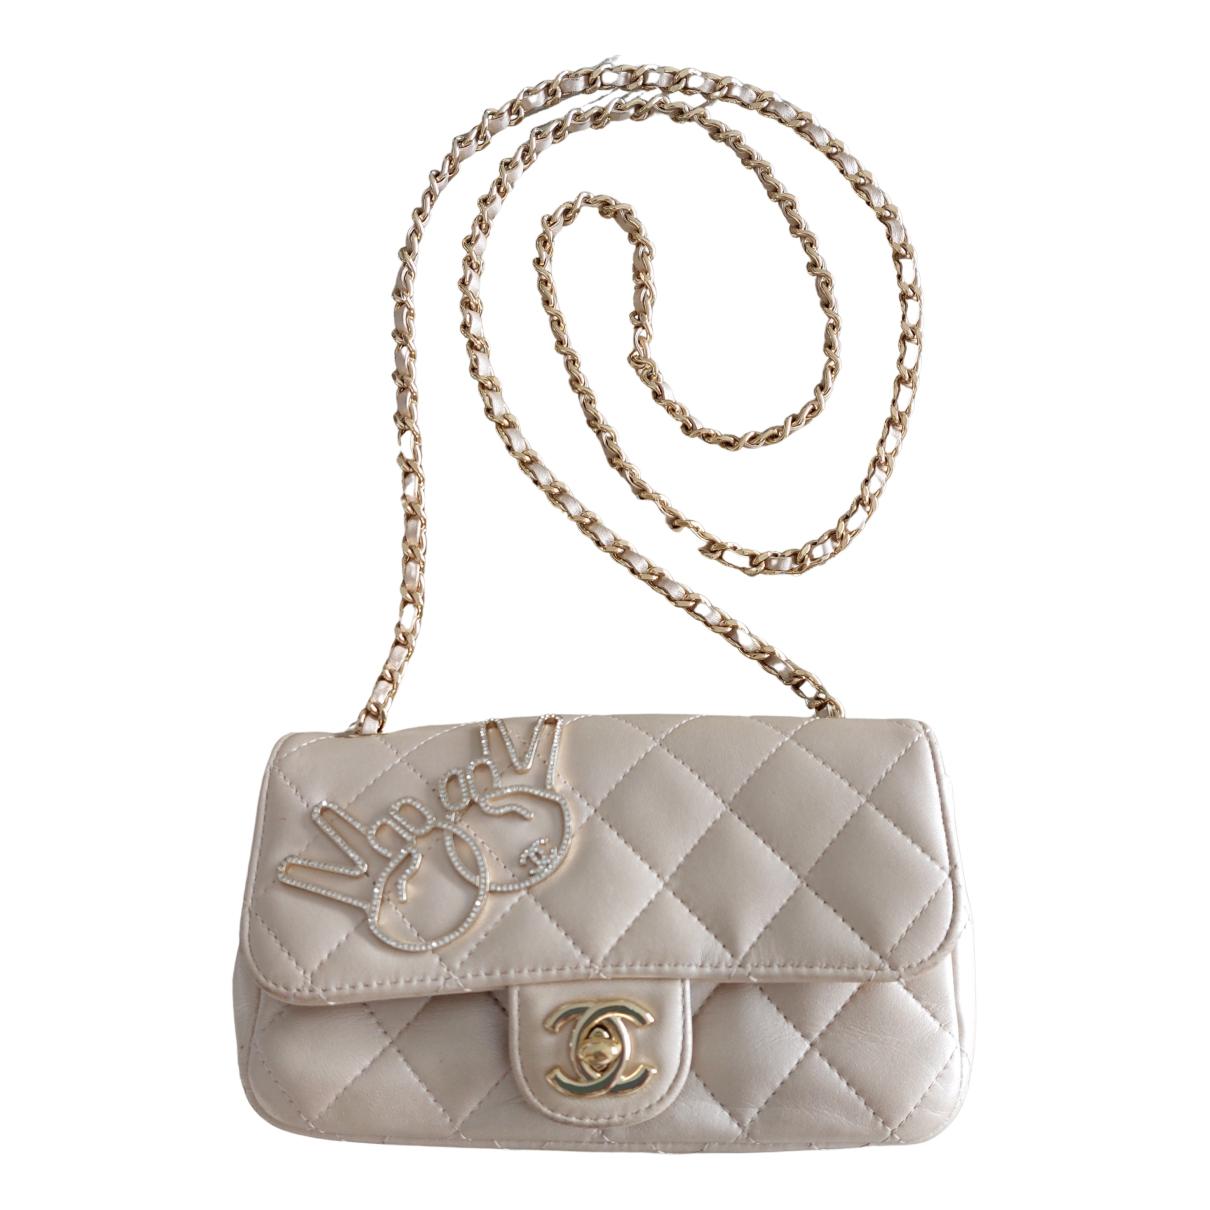 Timeless/classique leather crossbody bag Chanel Gold in Leather